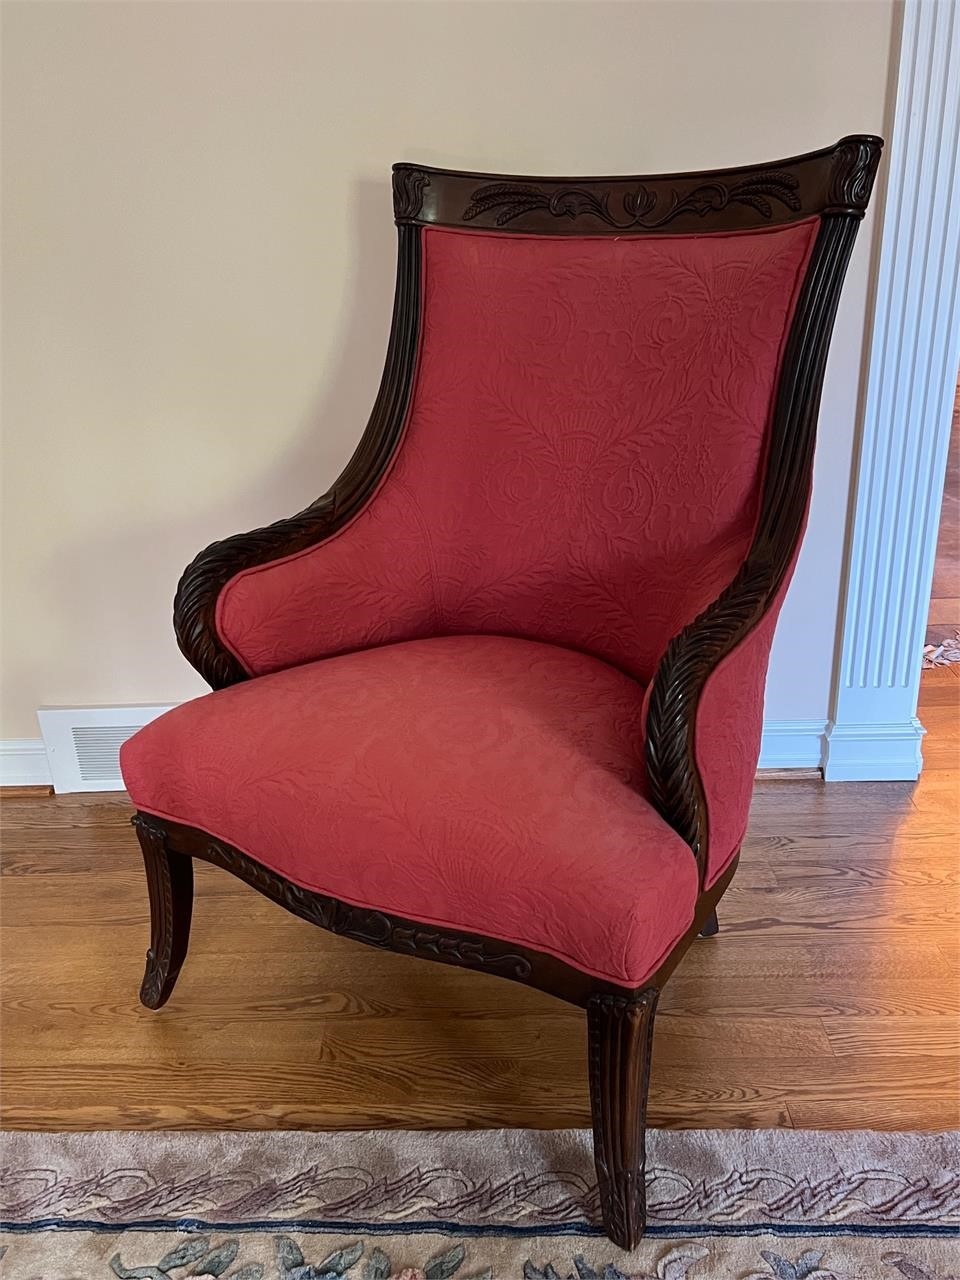 Antique Raspberry Upholstered Armchair